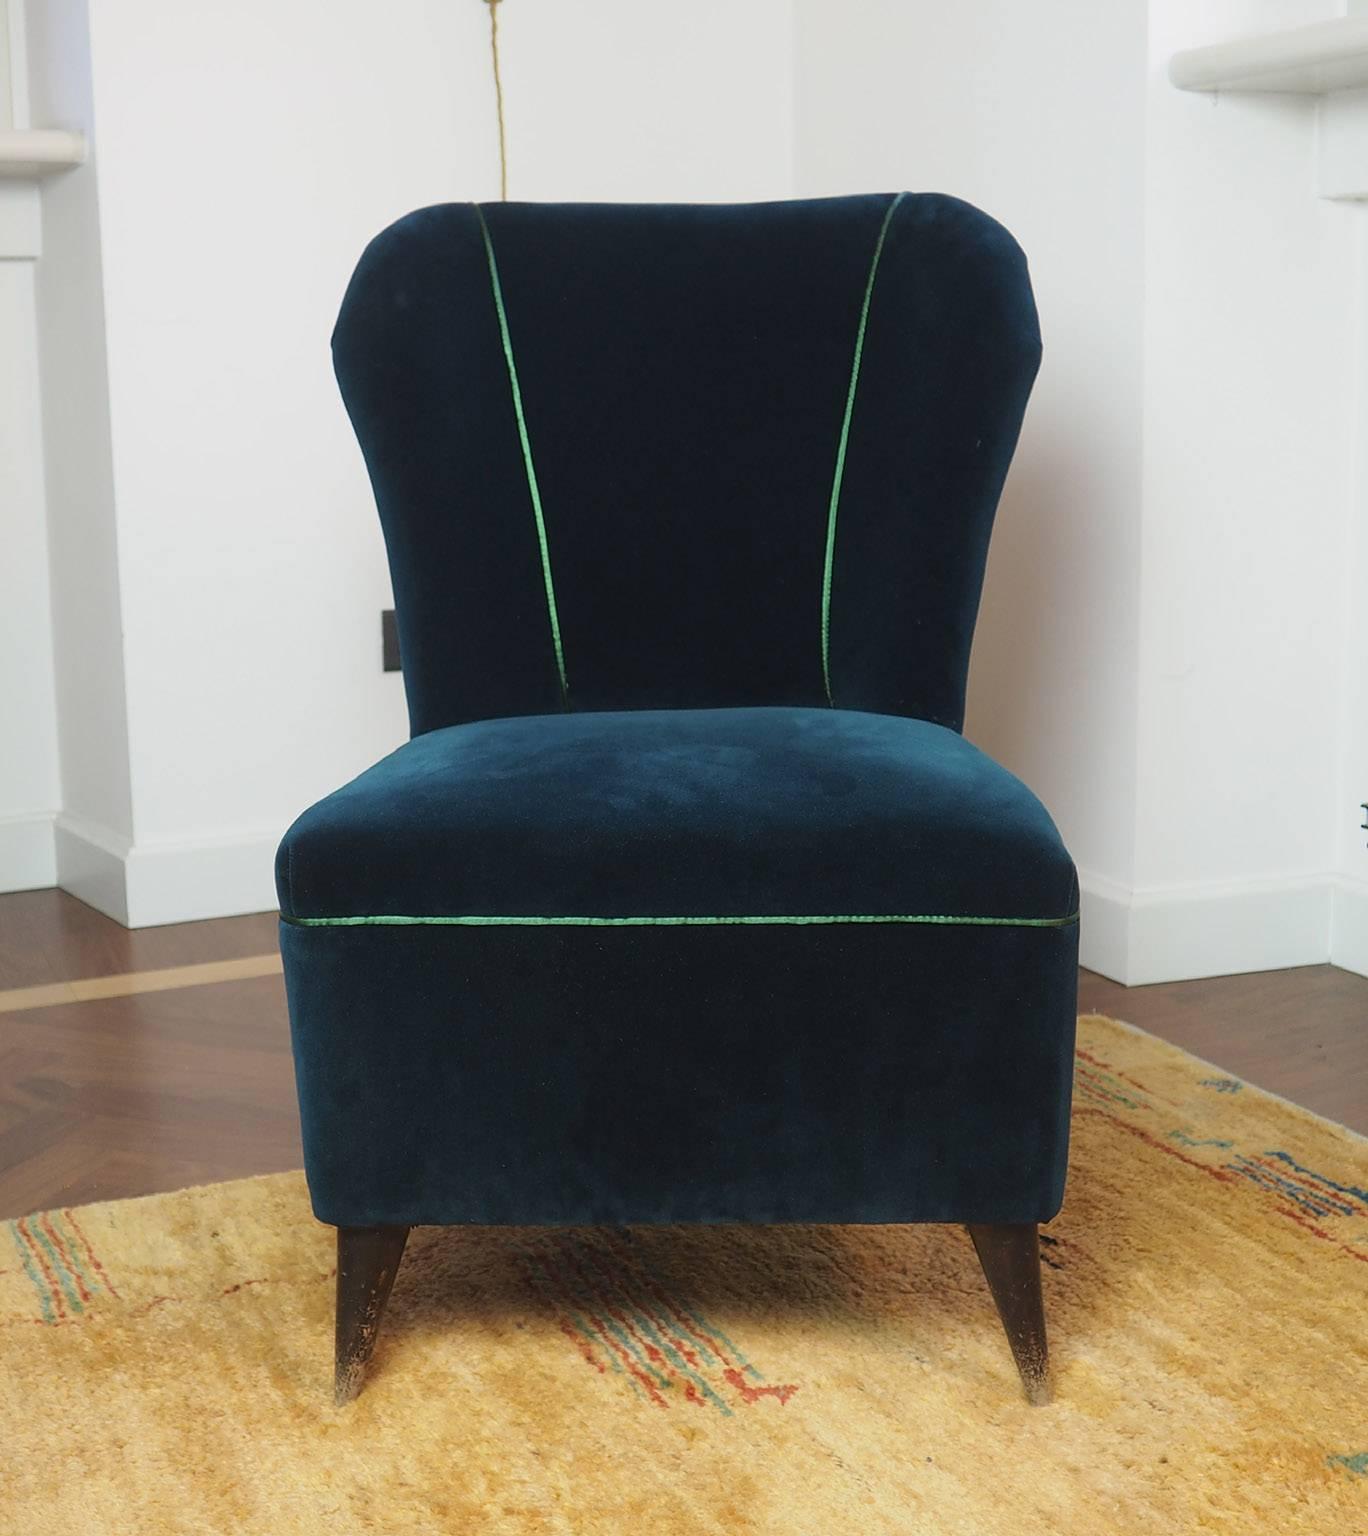 Pair of very nice small armchairs newly upholstered, covered with elegant green 